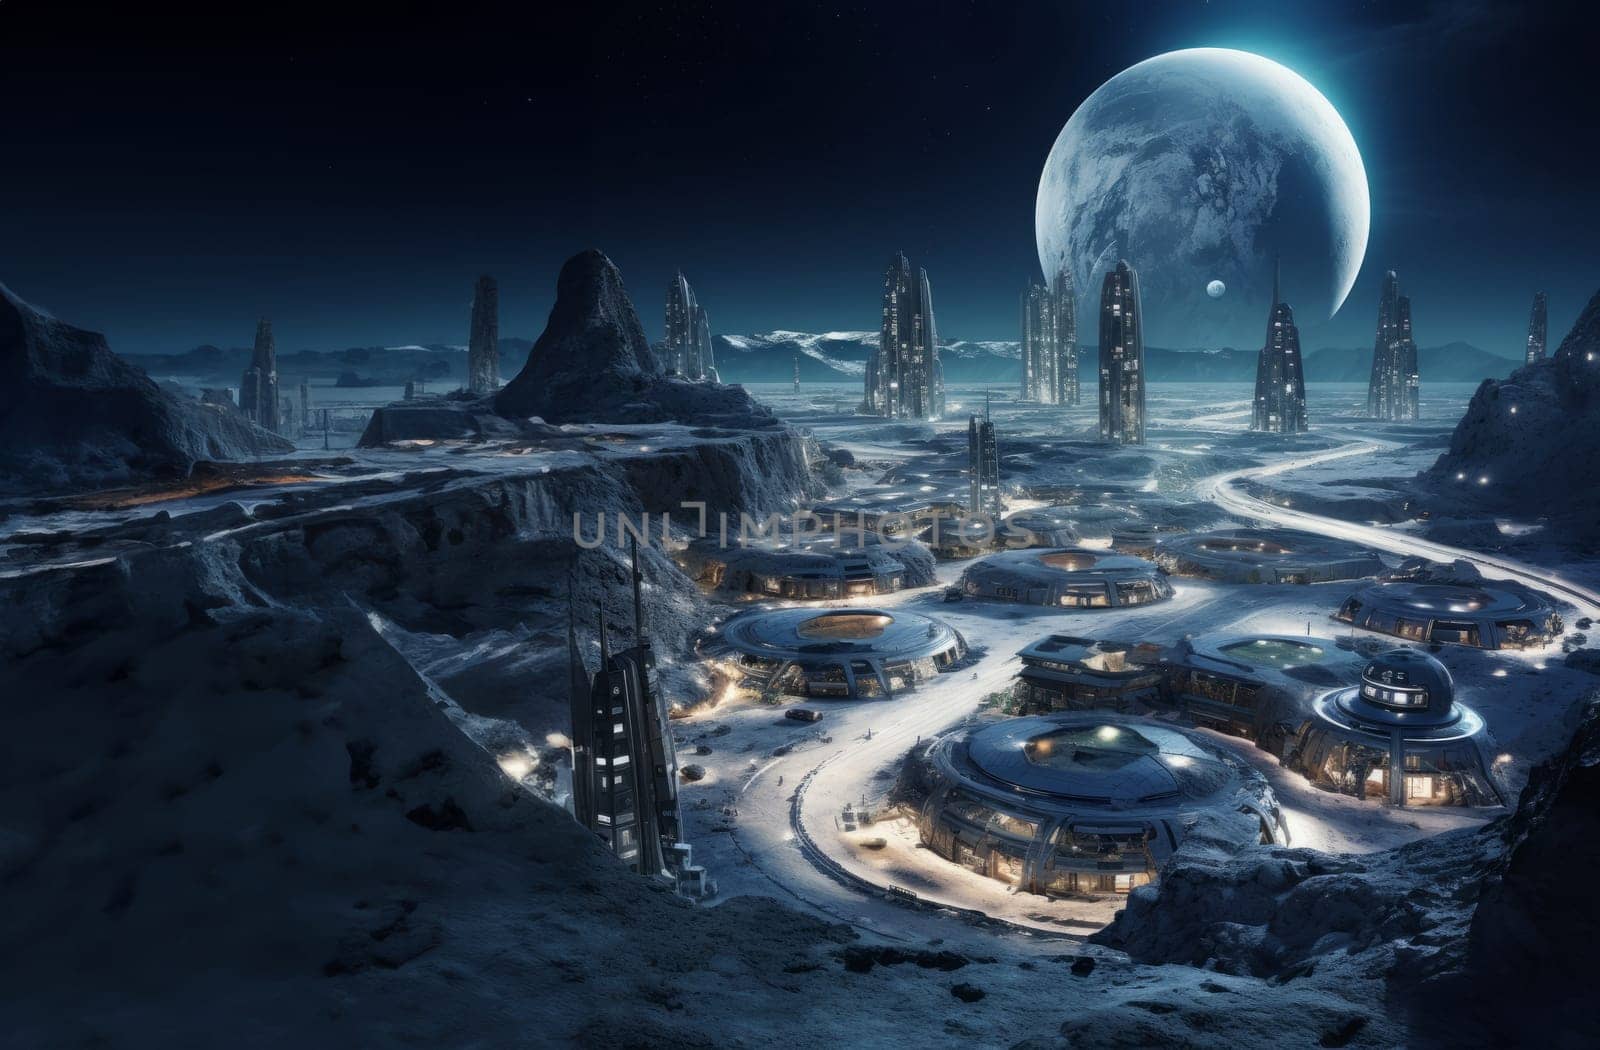 A futuristic city on Mars stands as a testament to human ingenuity and perseverance.